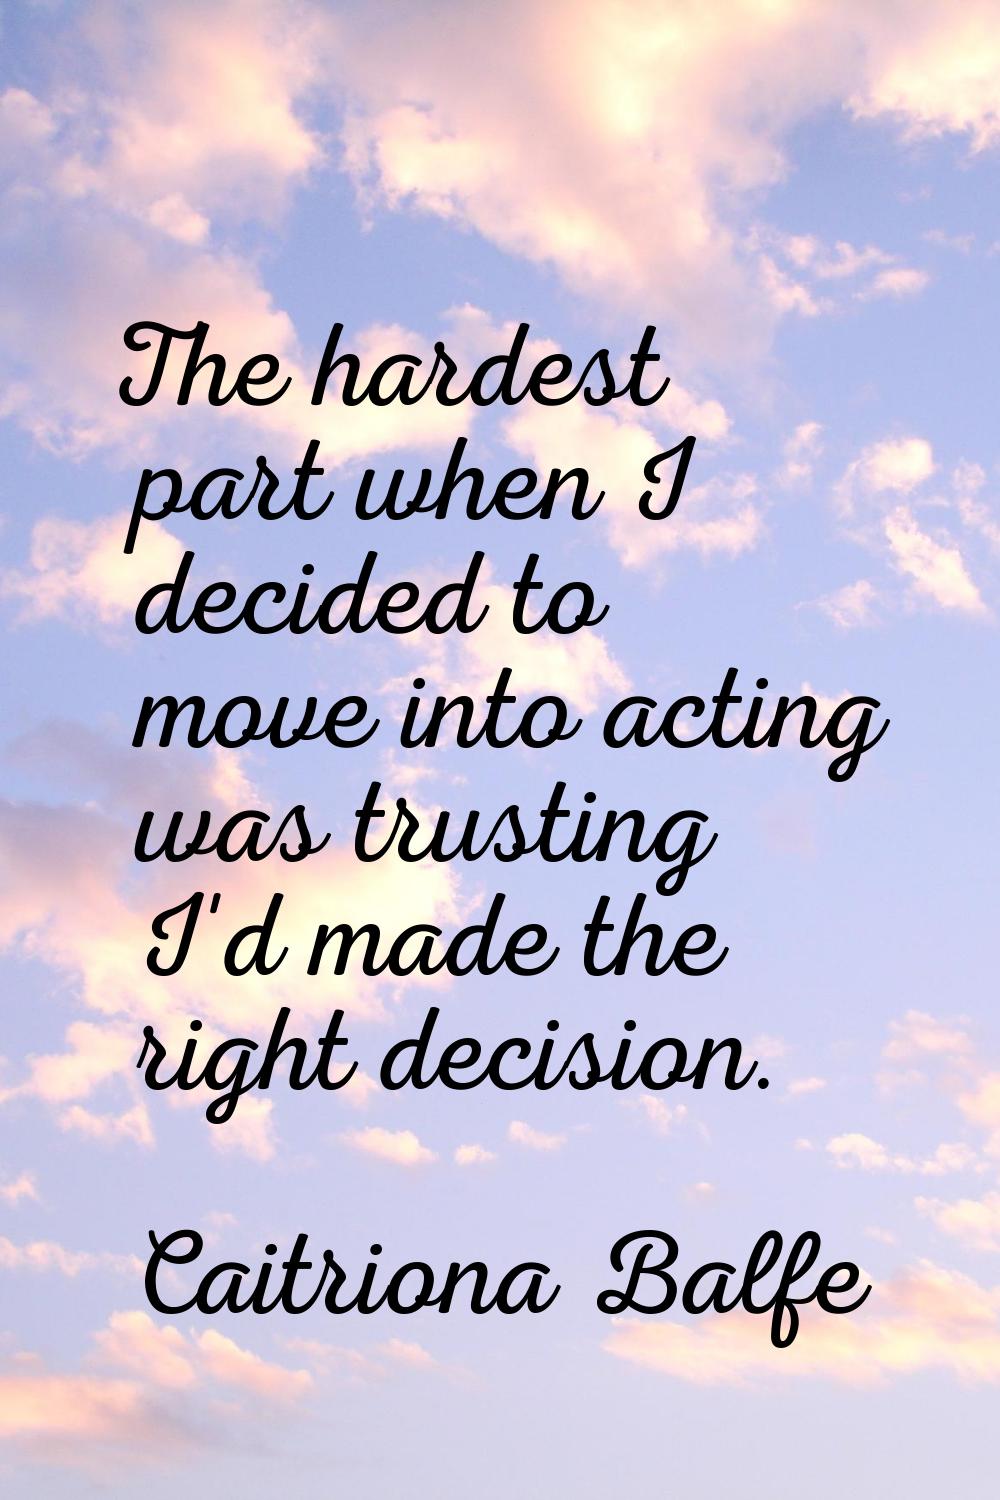 The hardest part when I decided to move into acting was trusting I'd made the right decision.